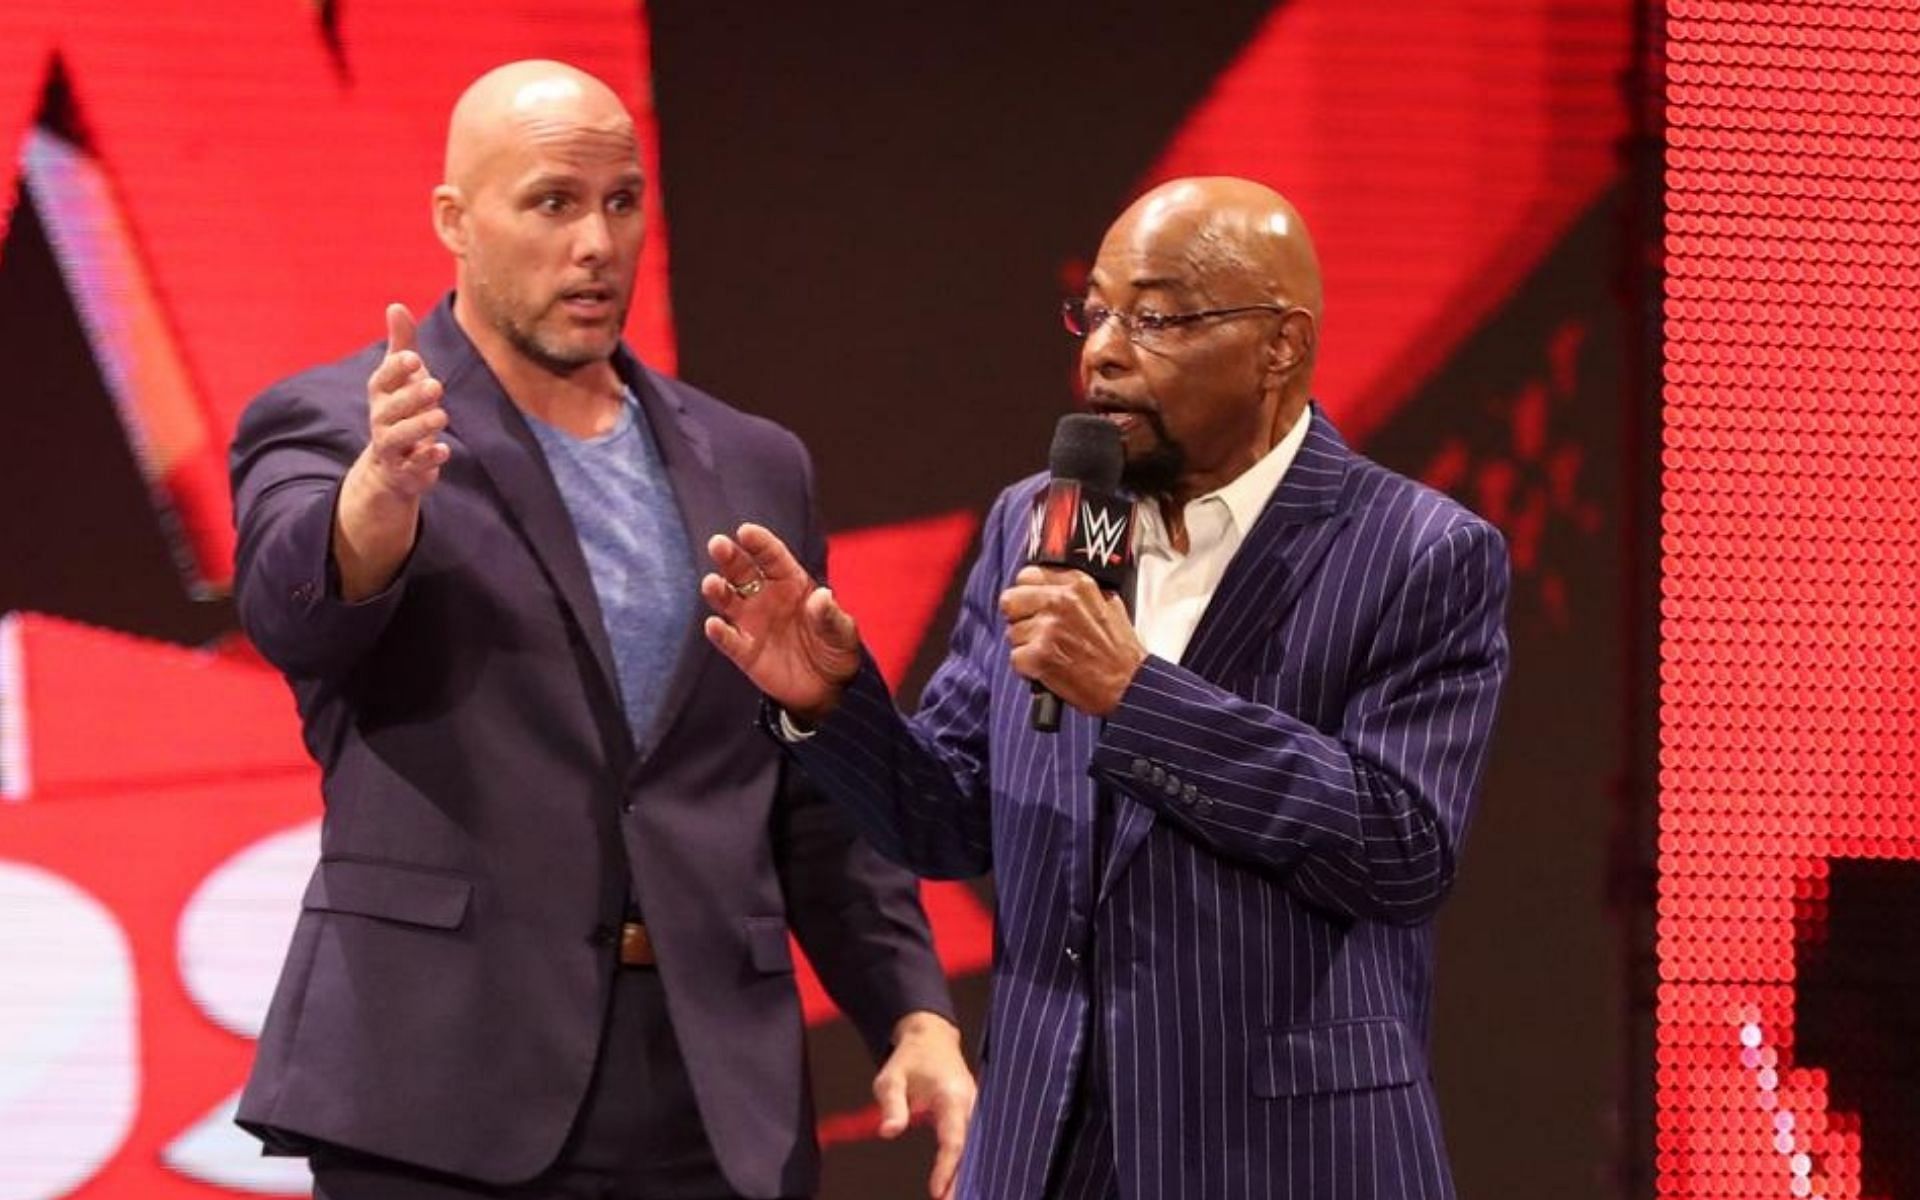 The WWE Hall of Famer commented on the exit of someone once considered a future Champion